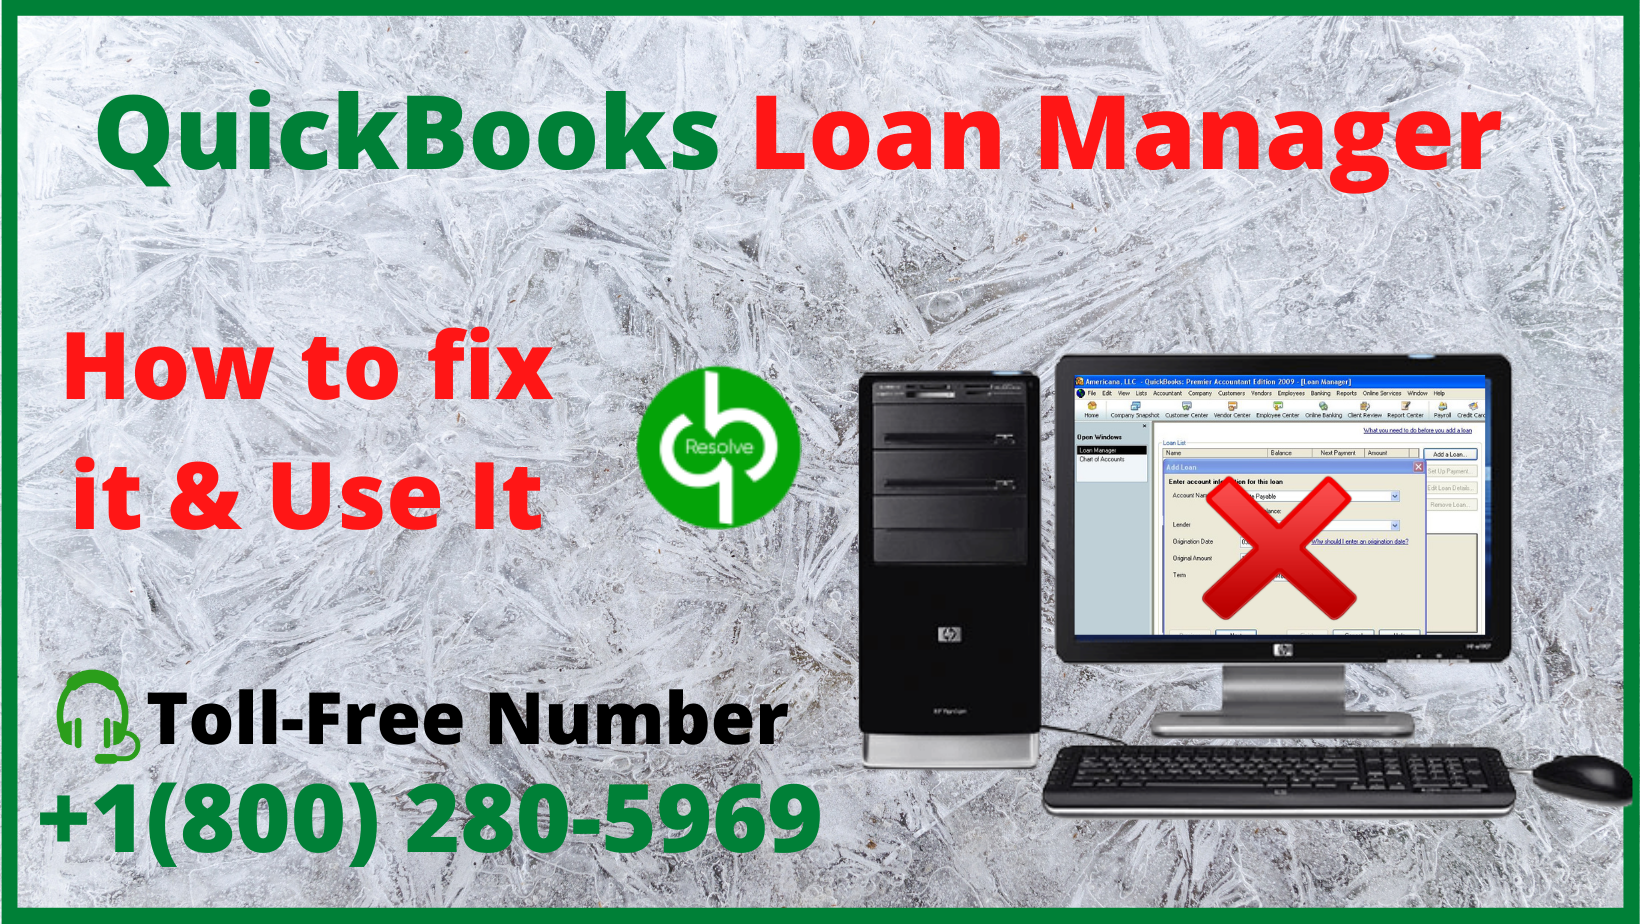 Hopefully, the information mentioned above will help you to use the QuickBooks Loan Manager.